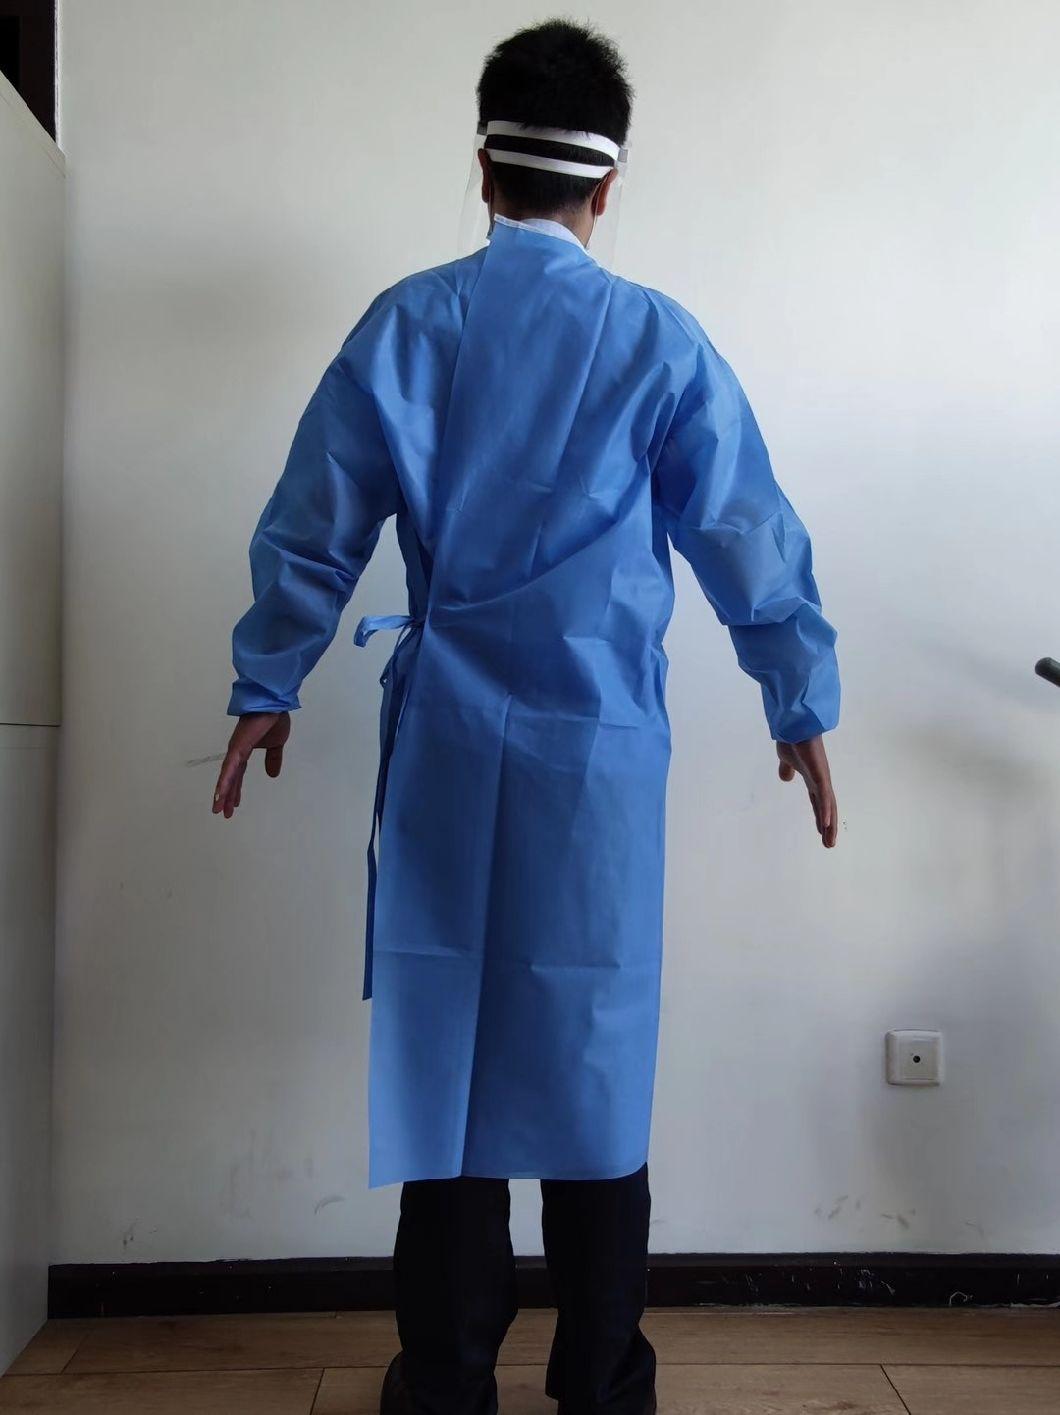 Sterile Disposable Operation Theatre Surgeon Barrier Gown